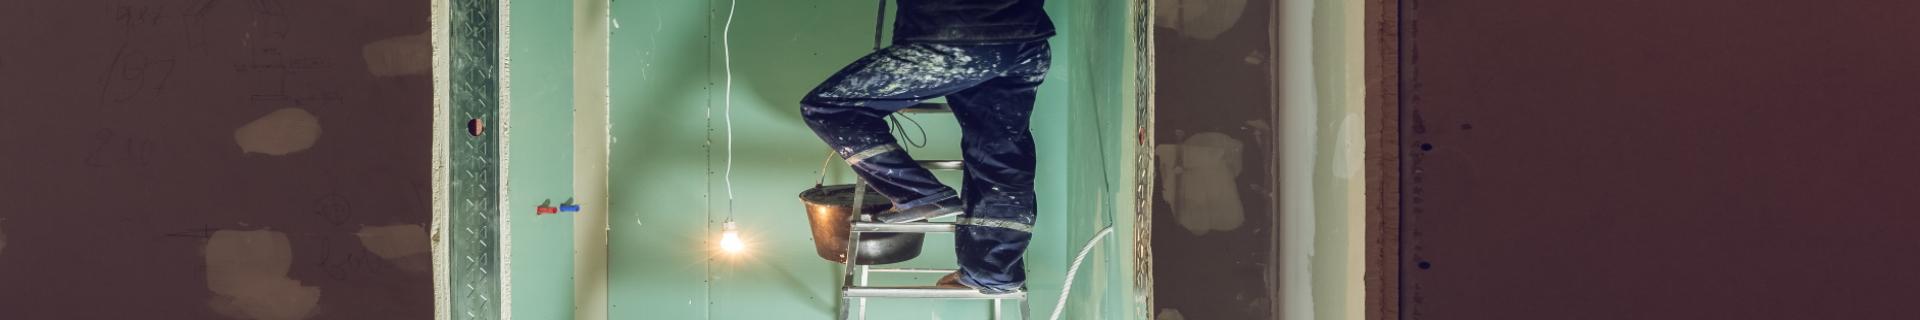 Ladder Safety in Construction Environments